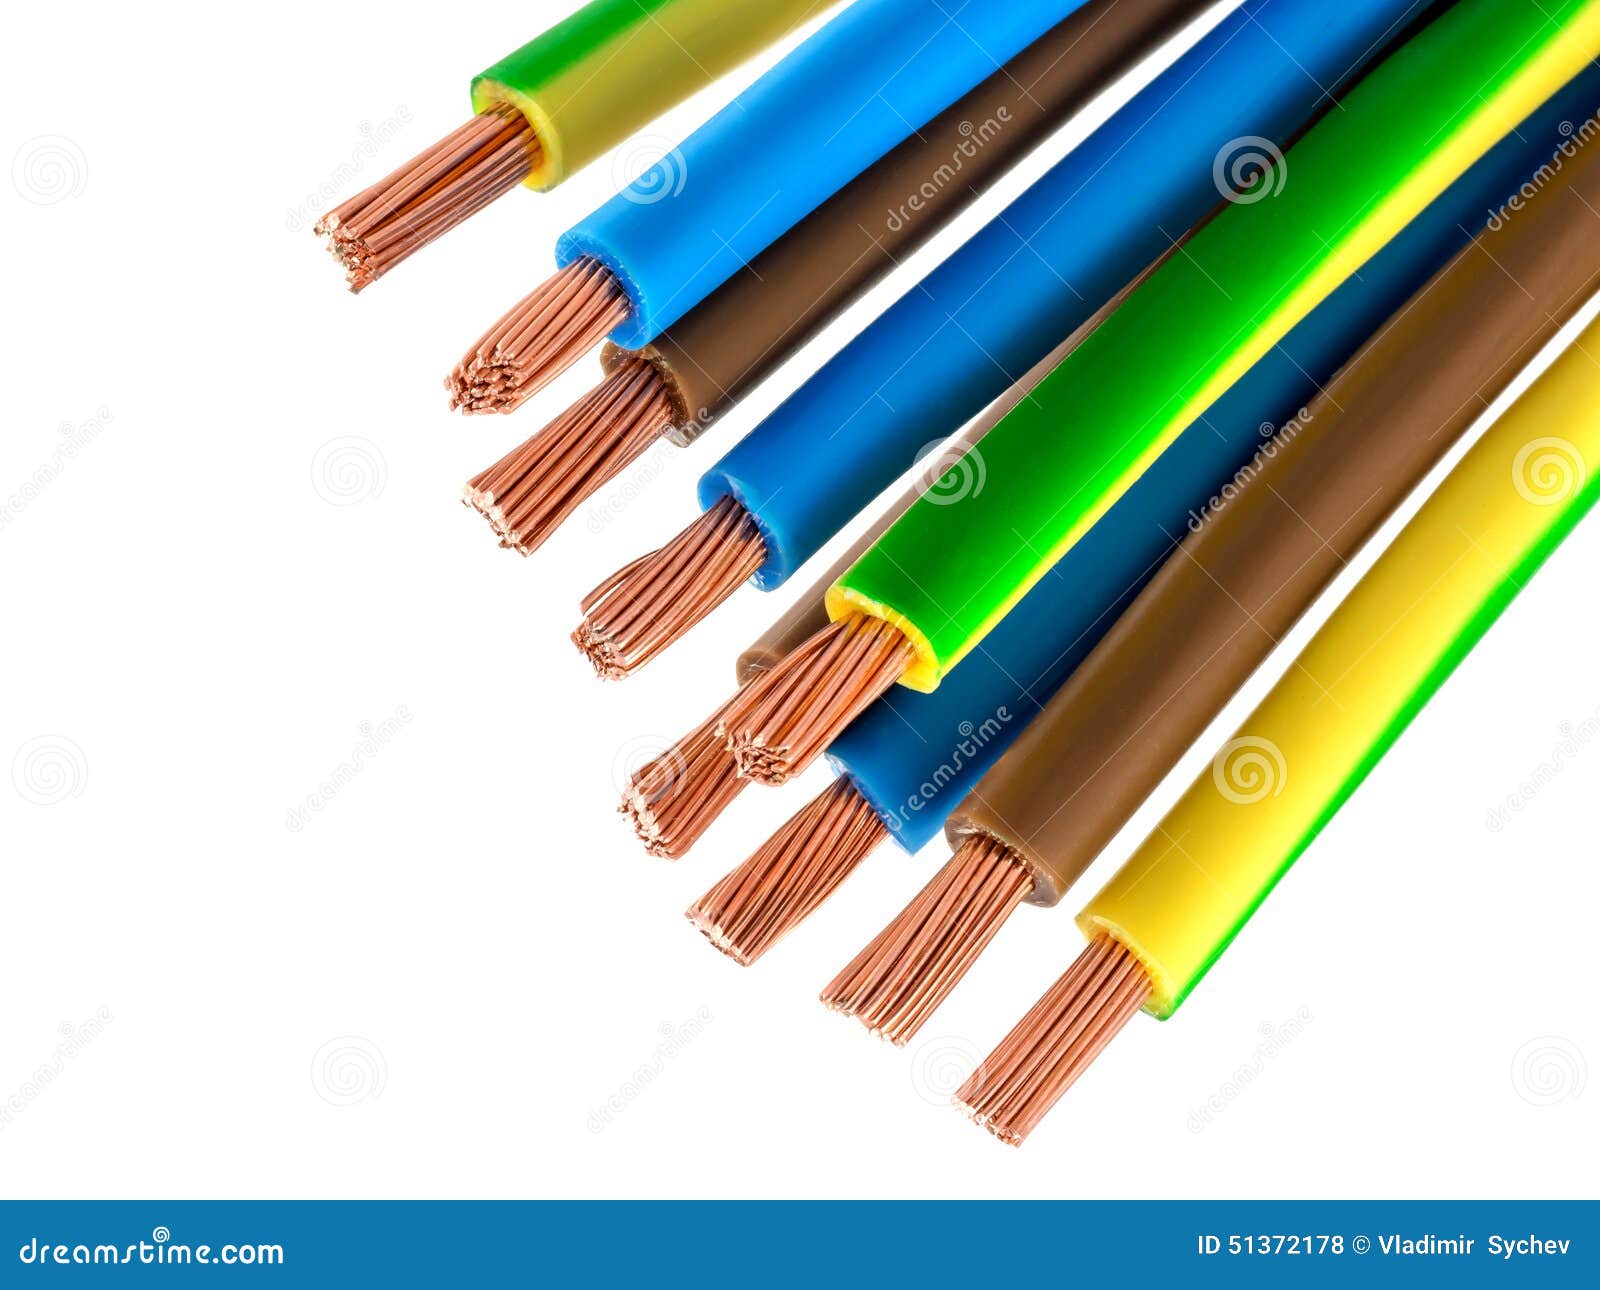 copper electric wires